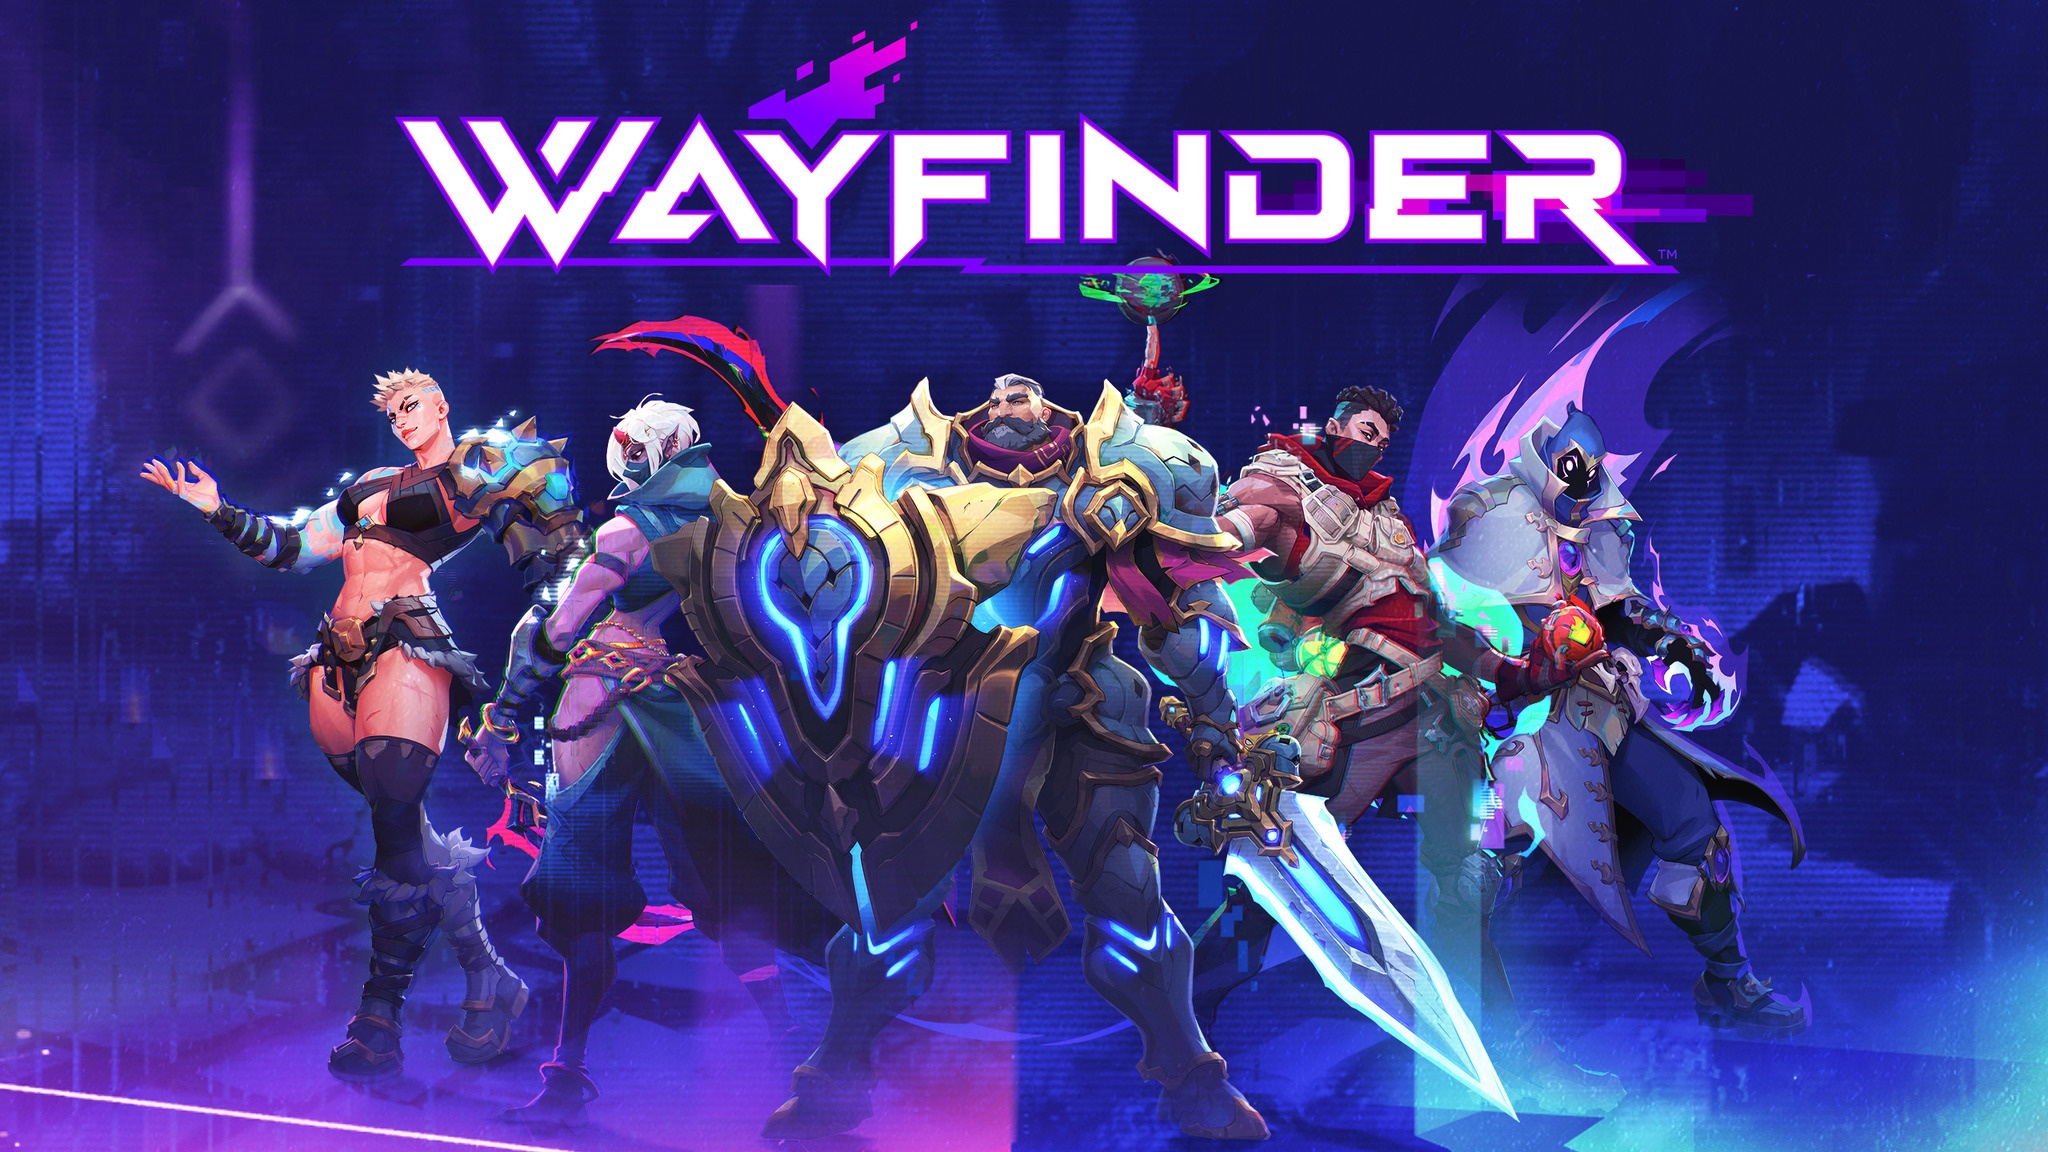 Wayfinder presents us with the new hero that arrives with the first season and we will have a new beta in April